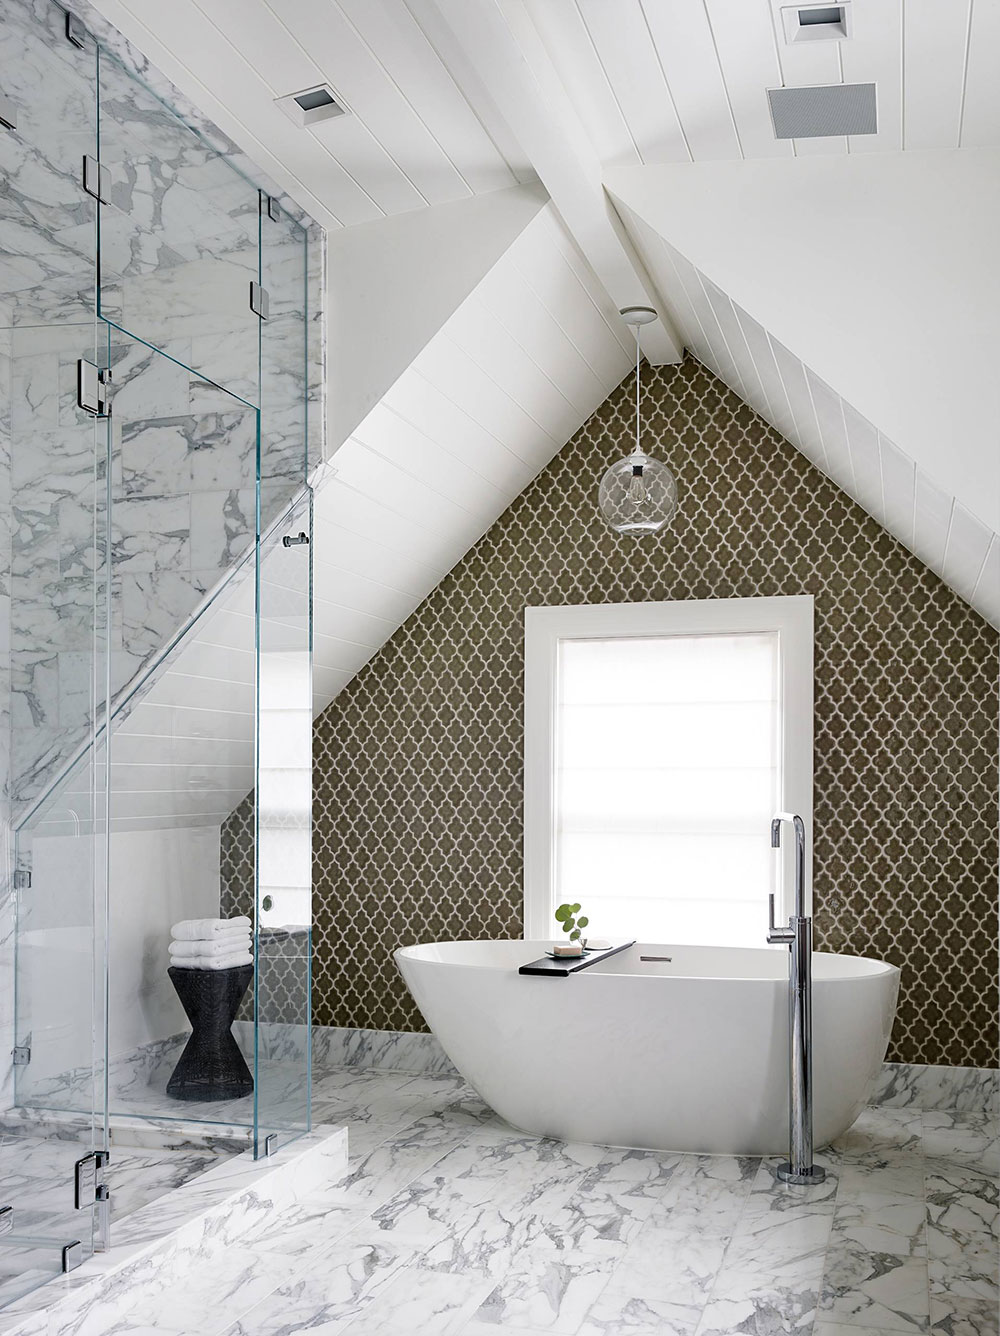 Luxurious attic bathroom with two types of tiles